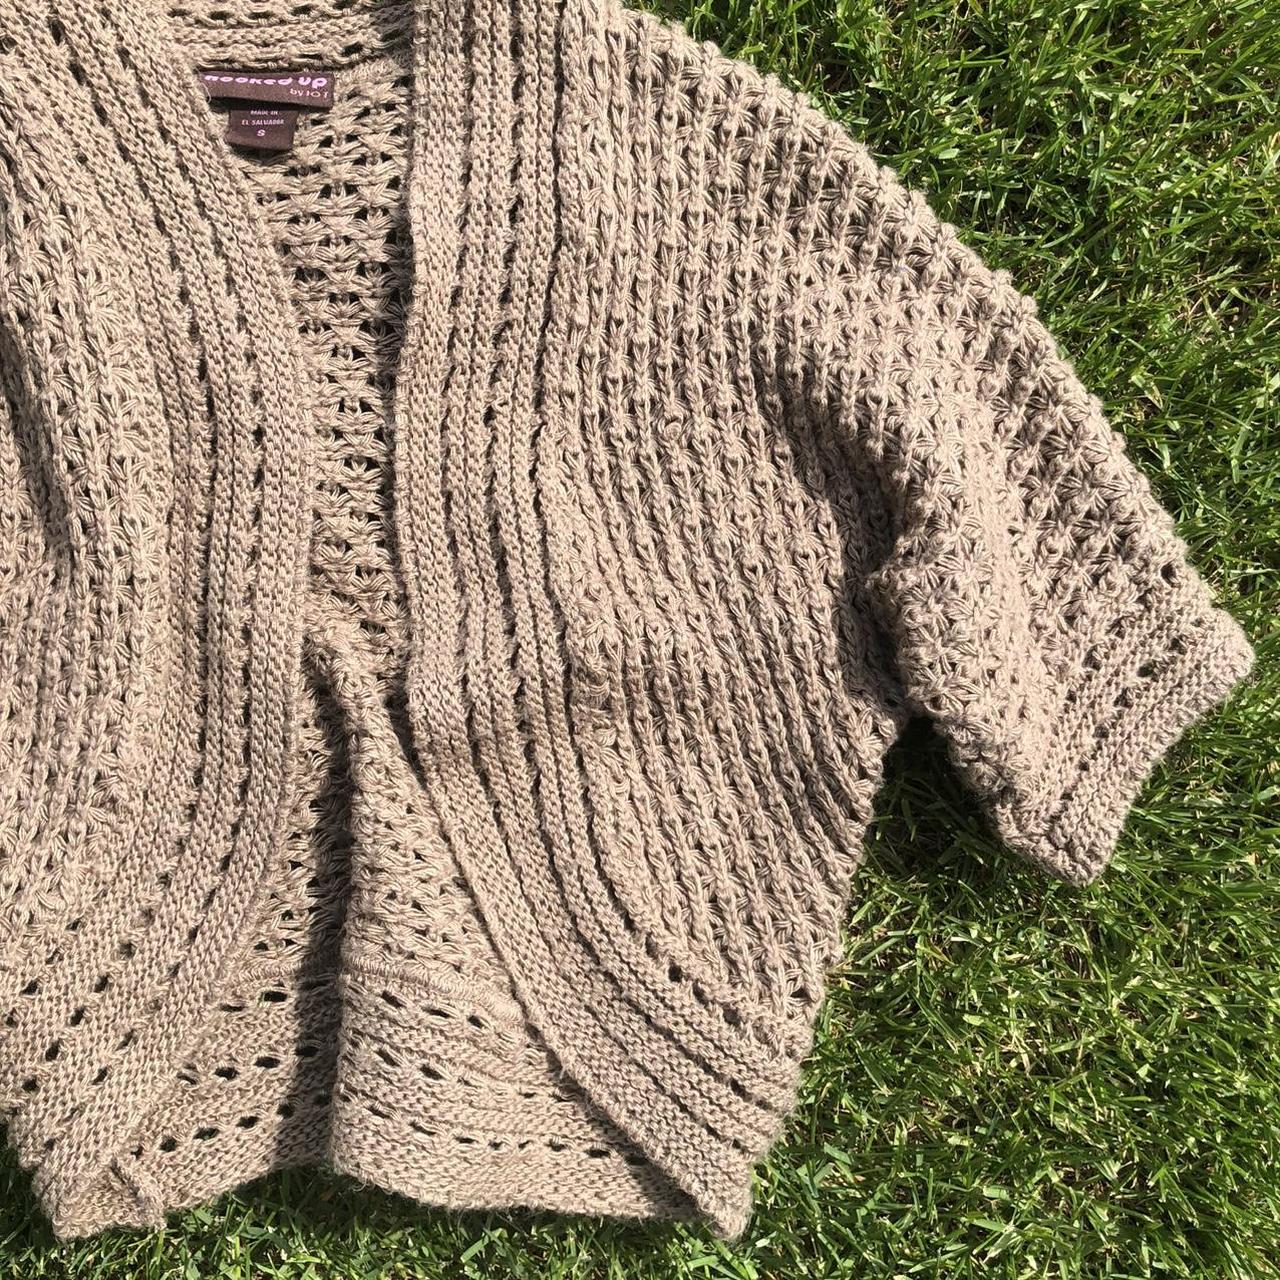 Product Image 4 - Super cute brown knit cardigan
Perfect